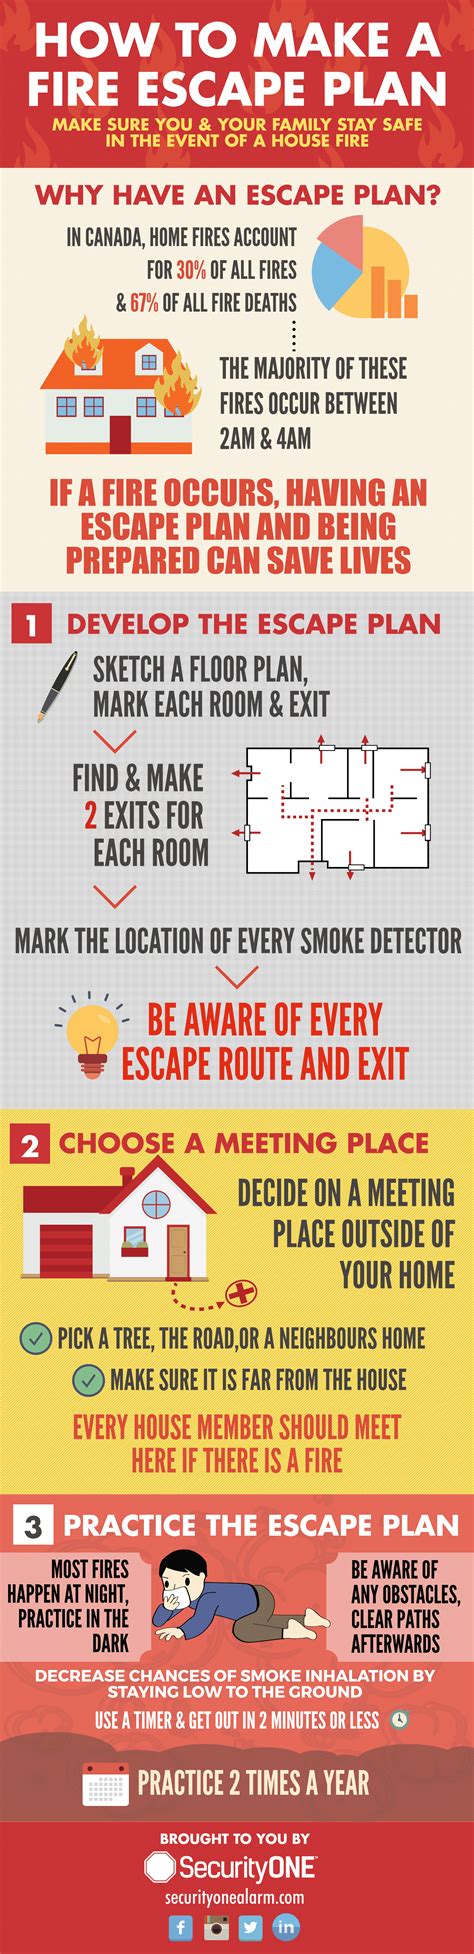 How to Make a Fire Escape Plan: Infographic Security ONE